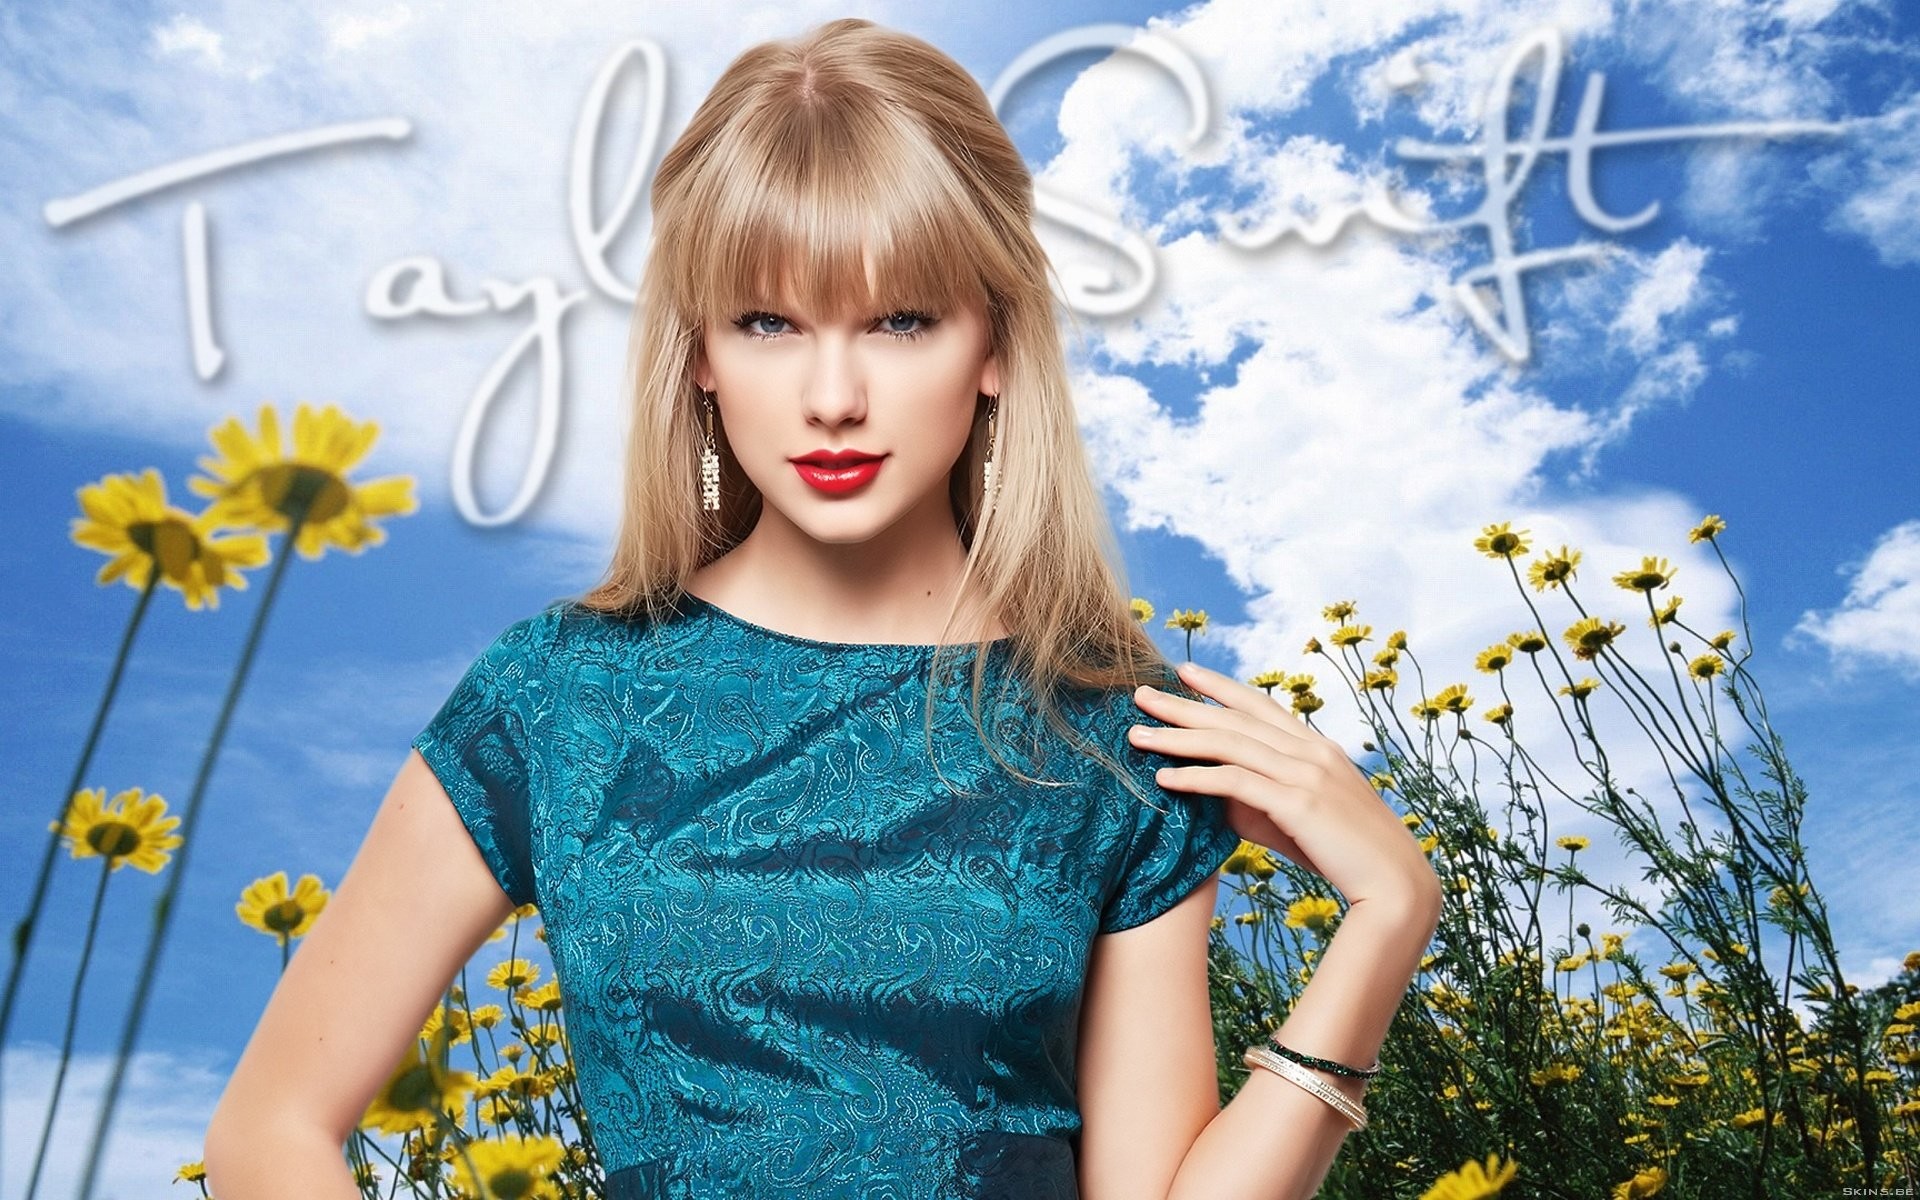 1920x1200 ... Download Famous American Singer Taylor Swift Wallpapers ...